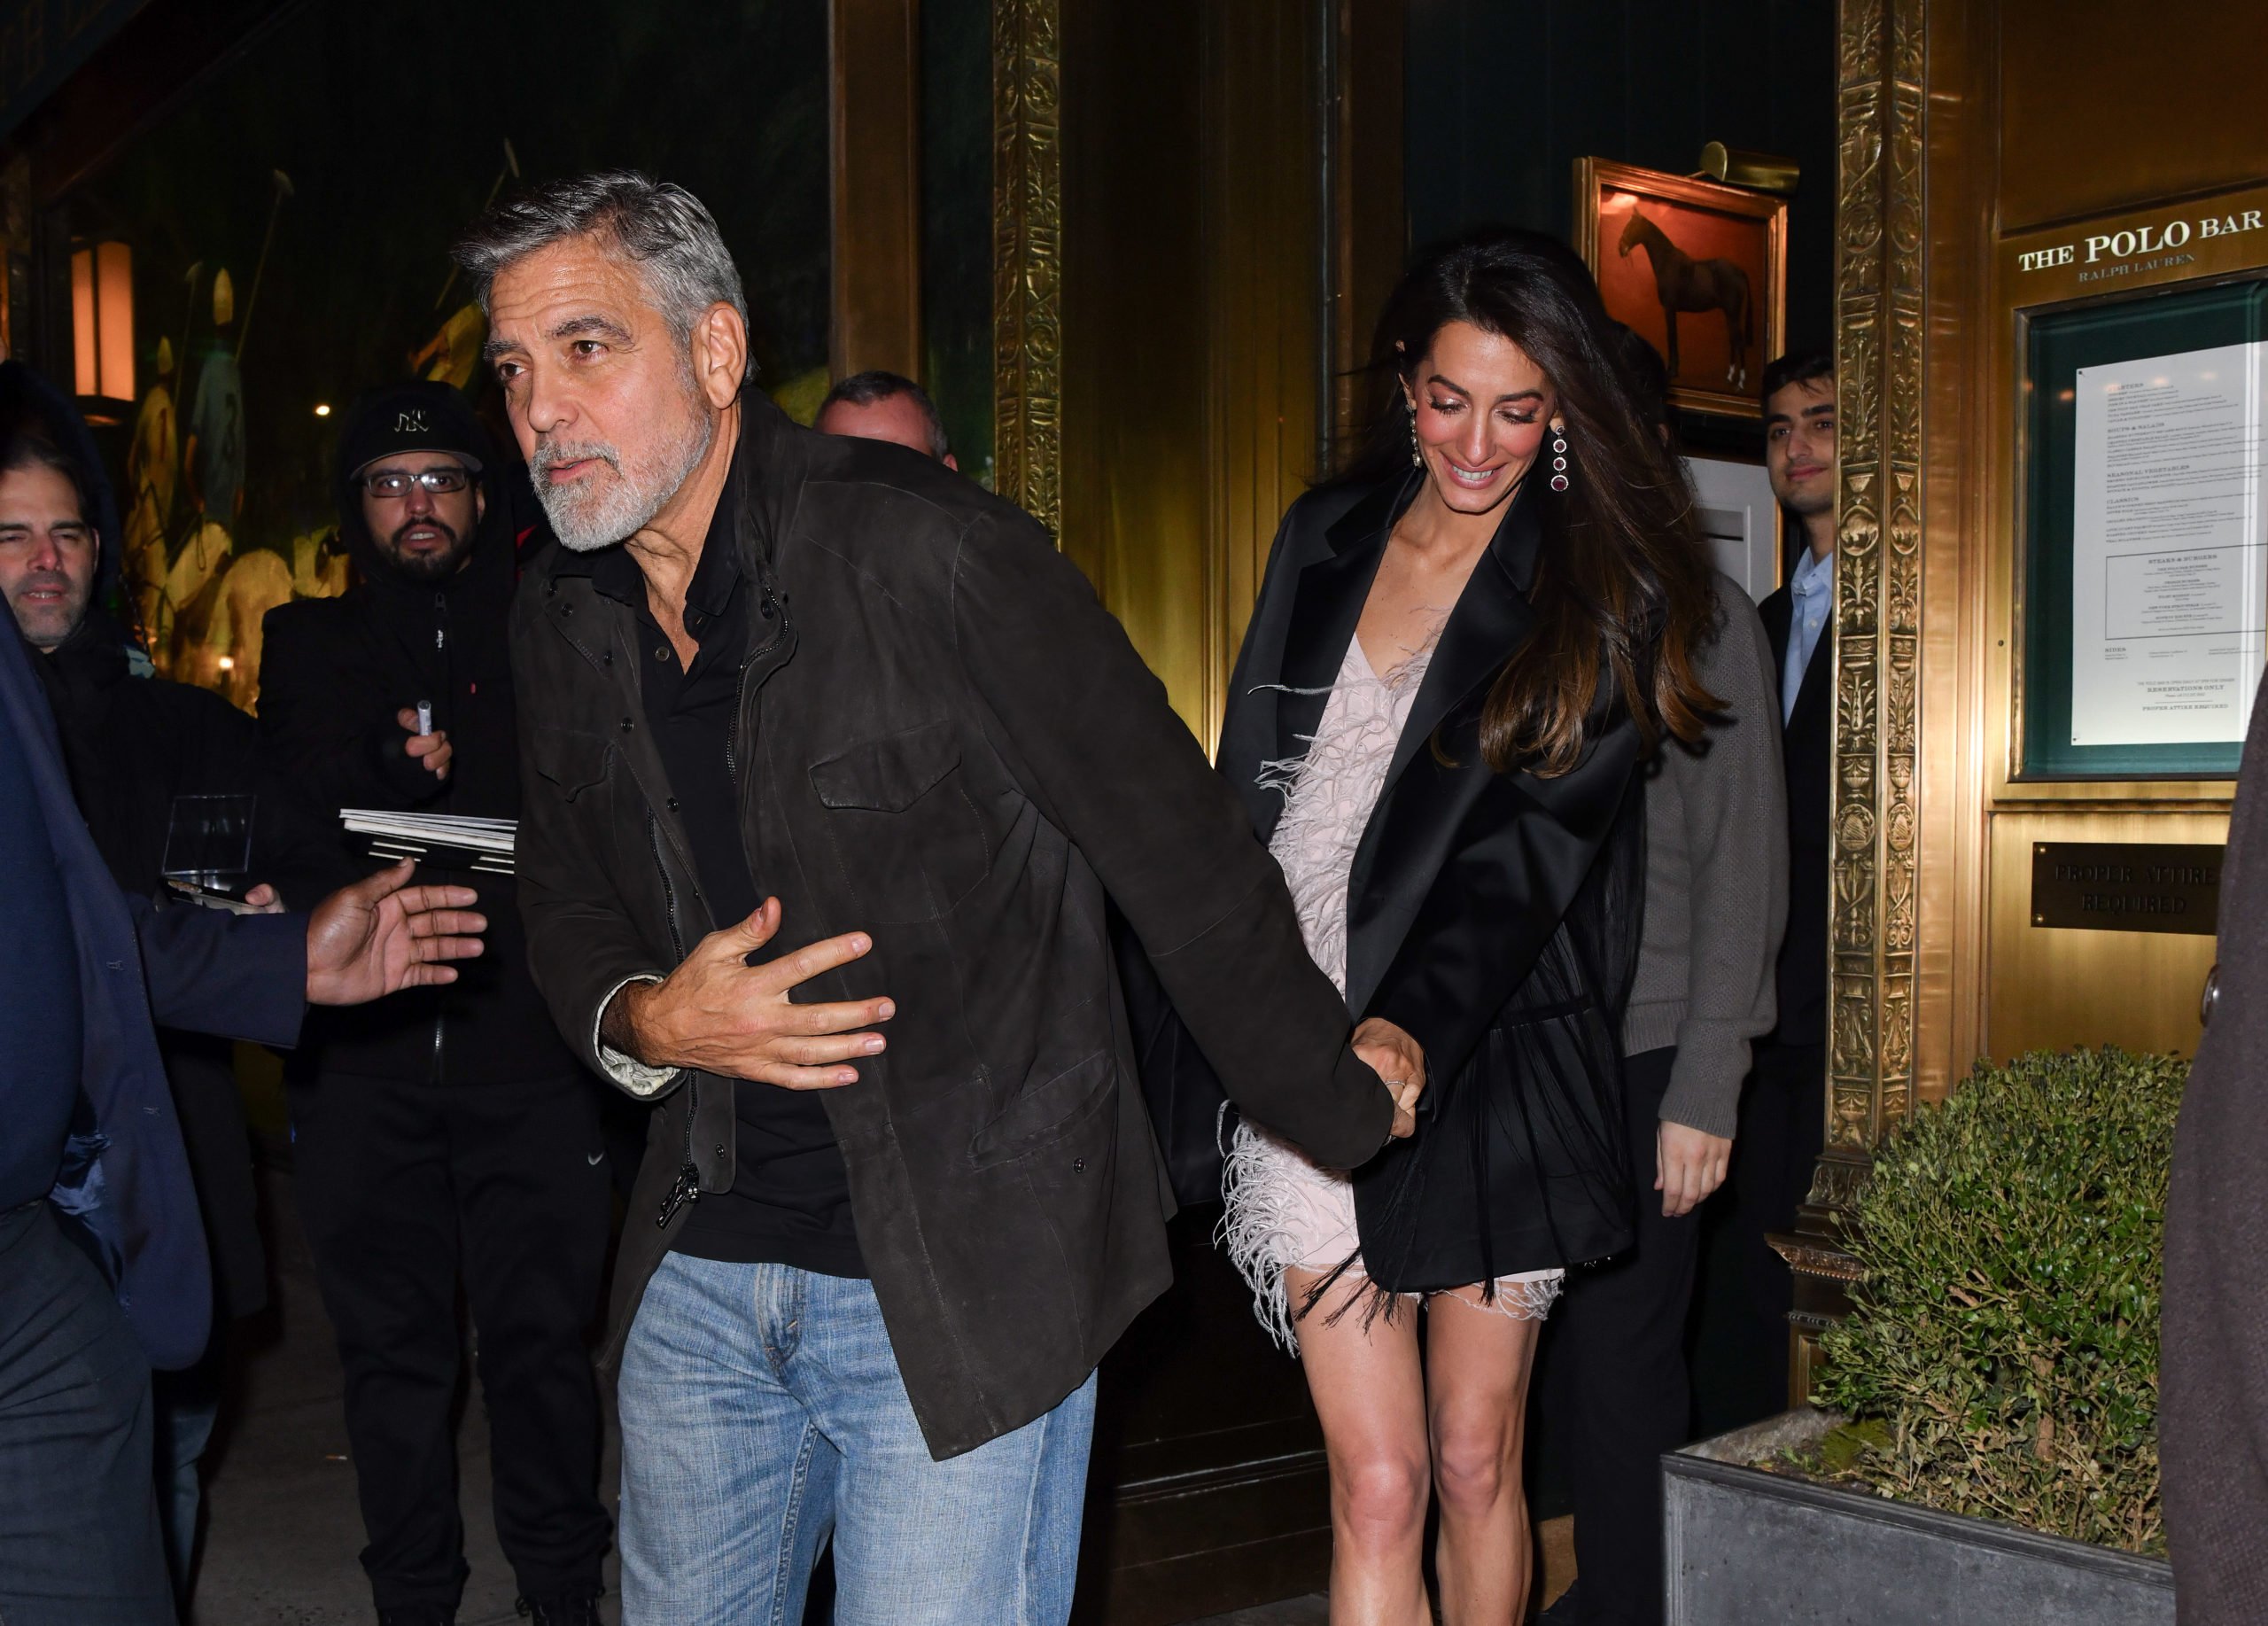 NEW YORK, NEW YORK - DECEMBER 14: George Clooney and Amal Clooney leave the Polo Bar on December 14, 2023 in New York City. (Photo by James Devaney/GC Images)